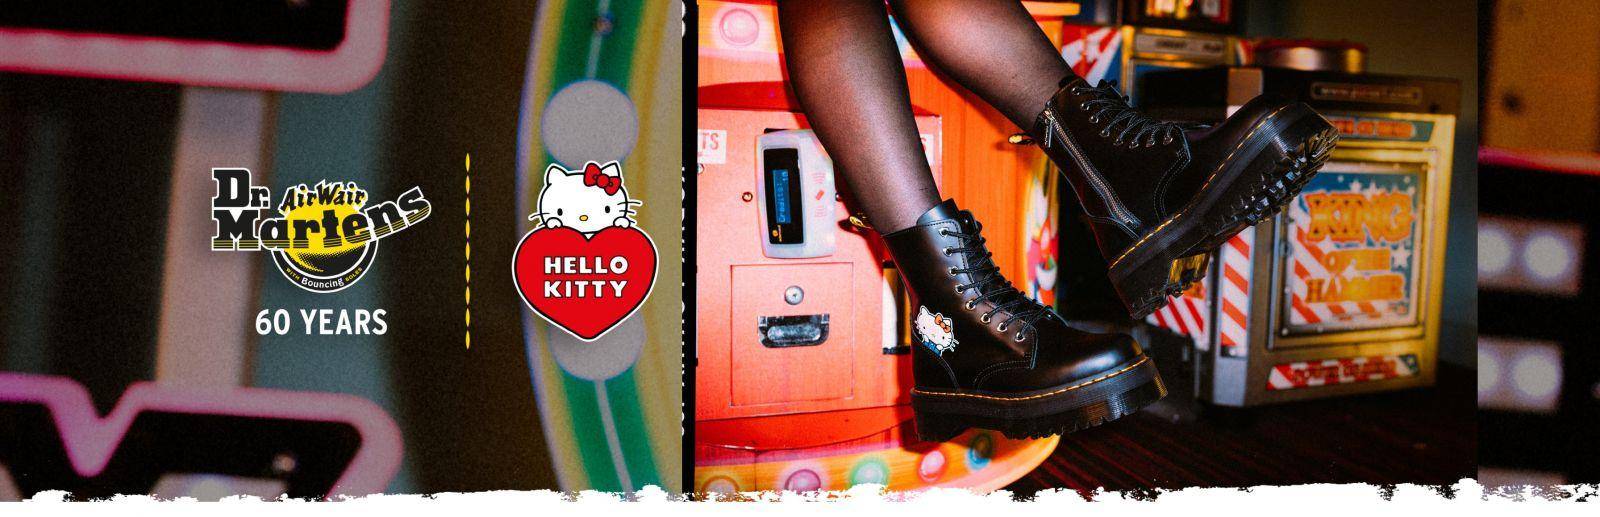 Dr. Martens, Hello Kitty